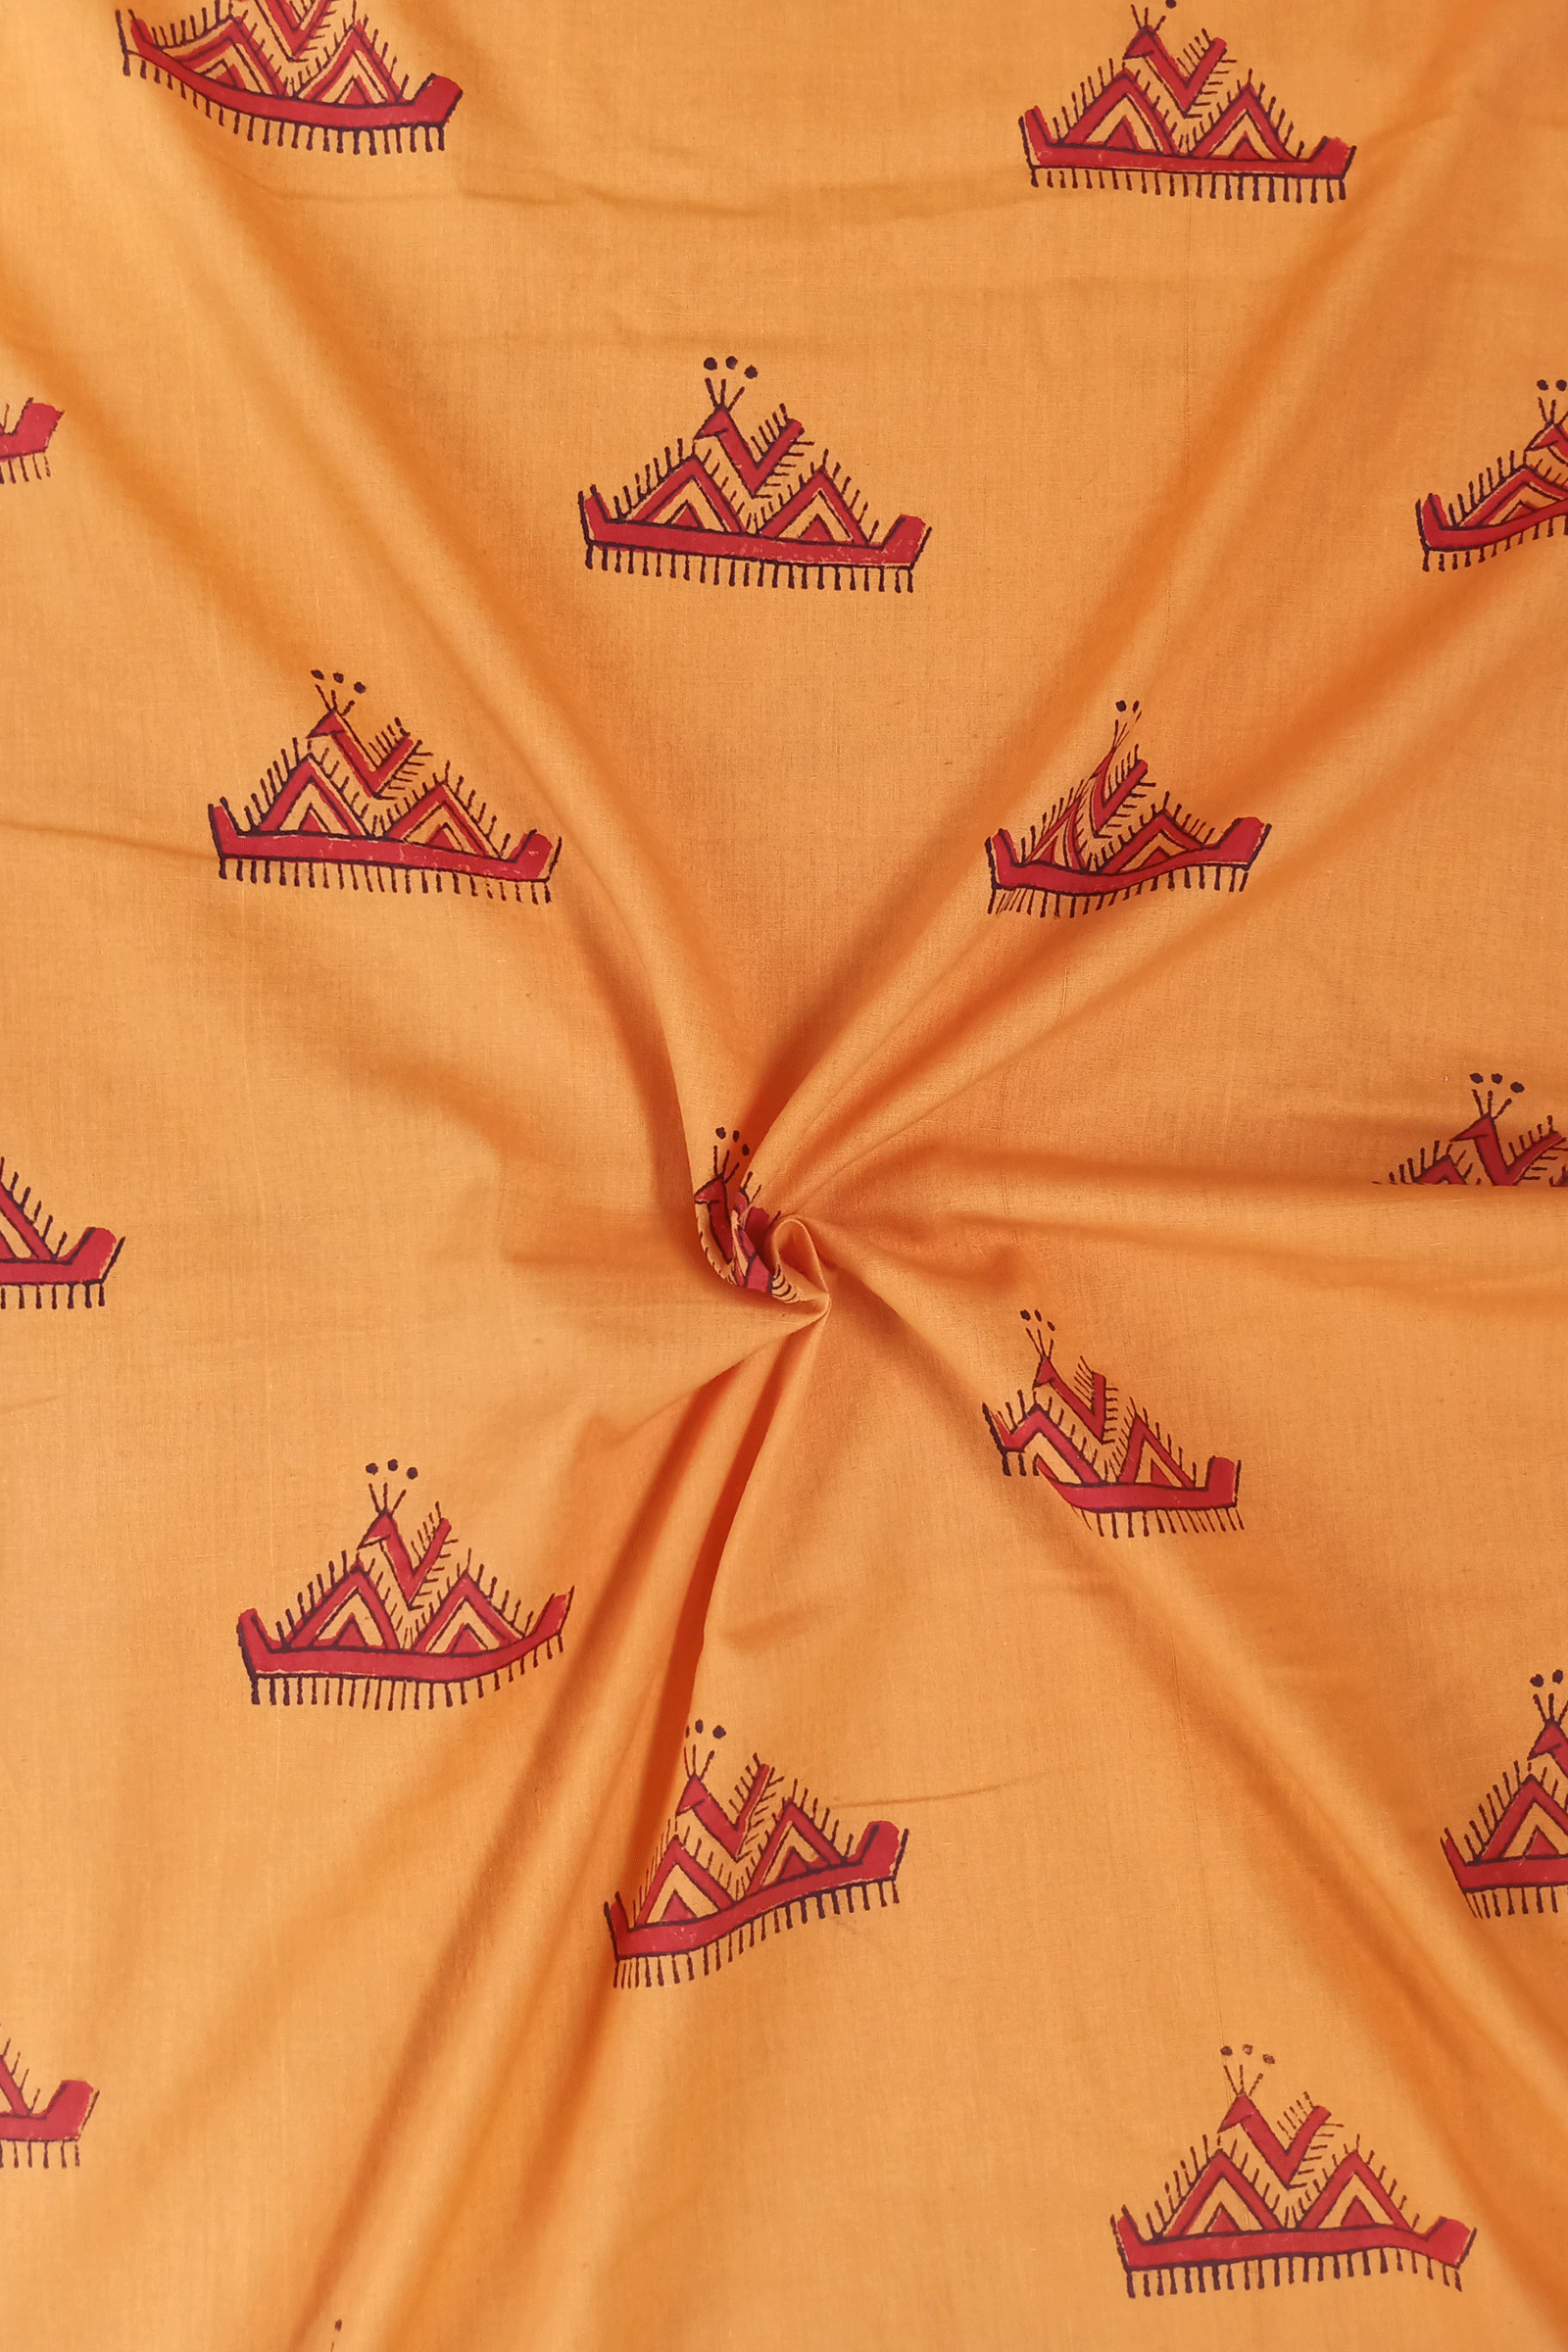 Chippa Hand Block Printed Orange Color Cotton Fabric With Black and Red Tribal Motif  SKU- BS60013 - Bhartiya Shilp